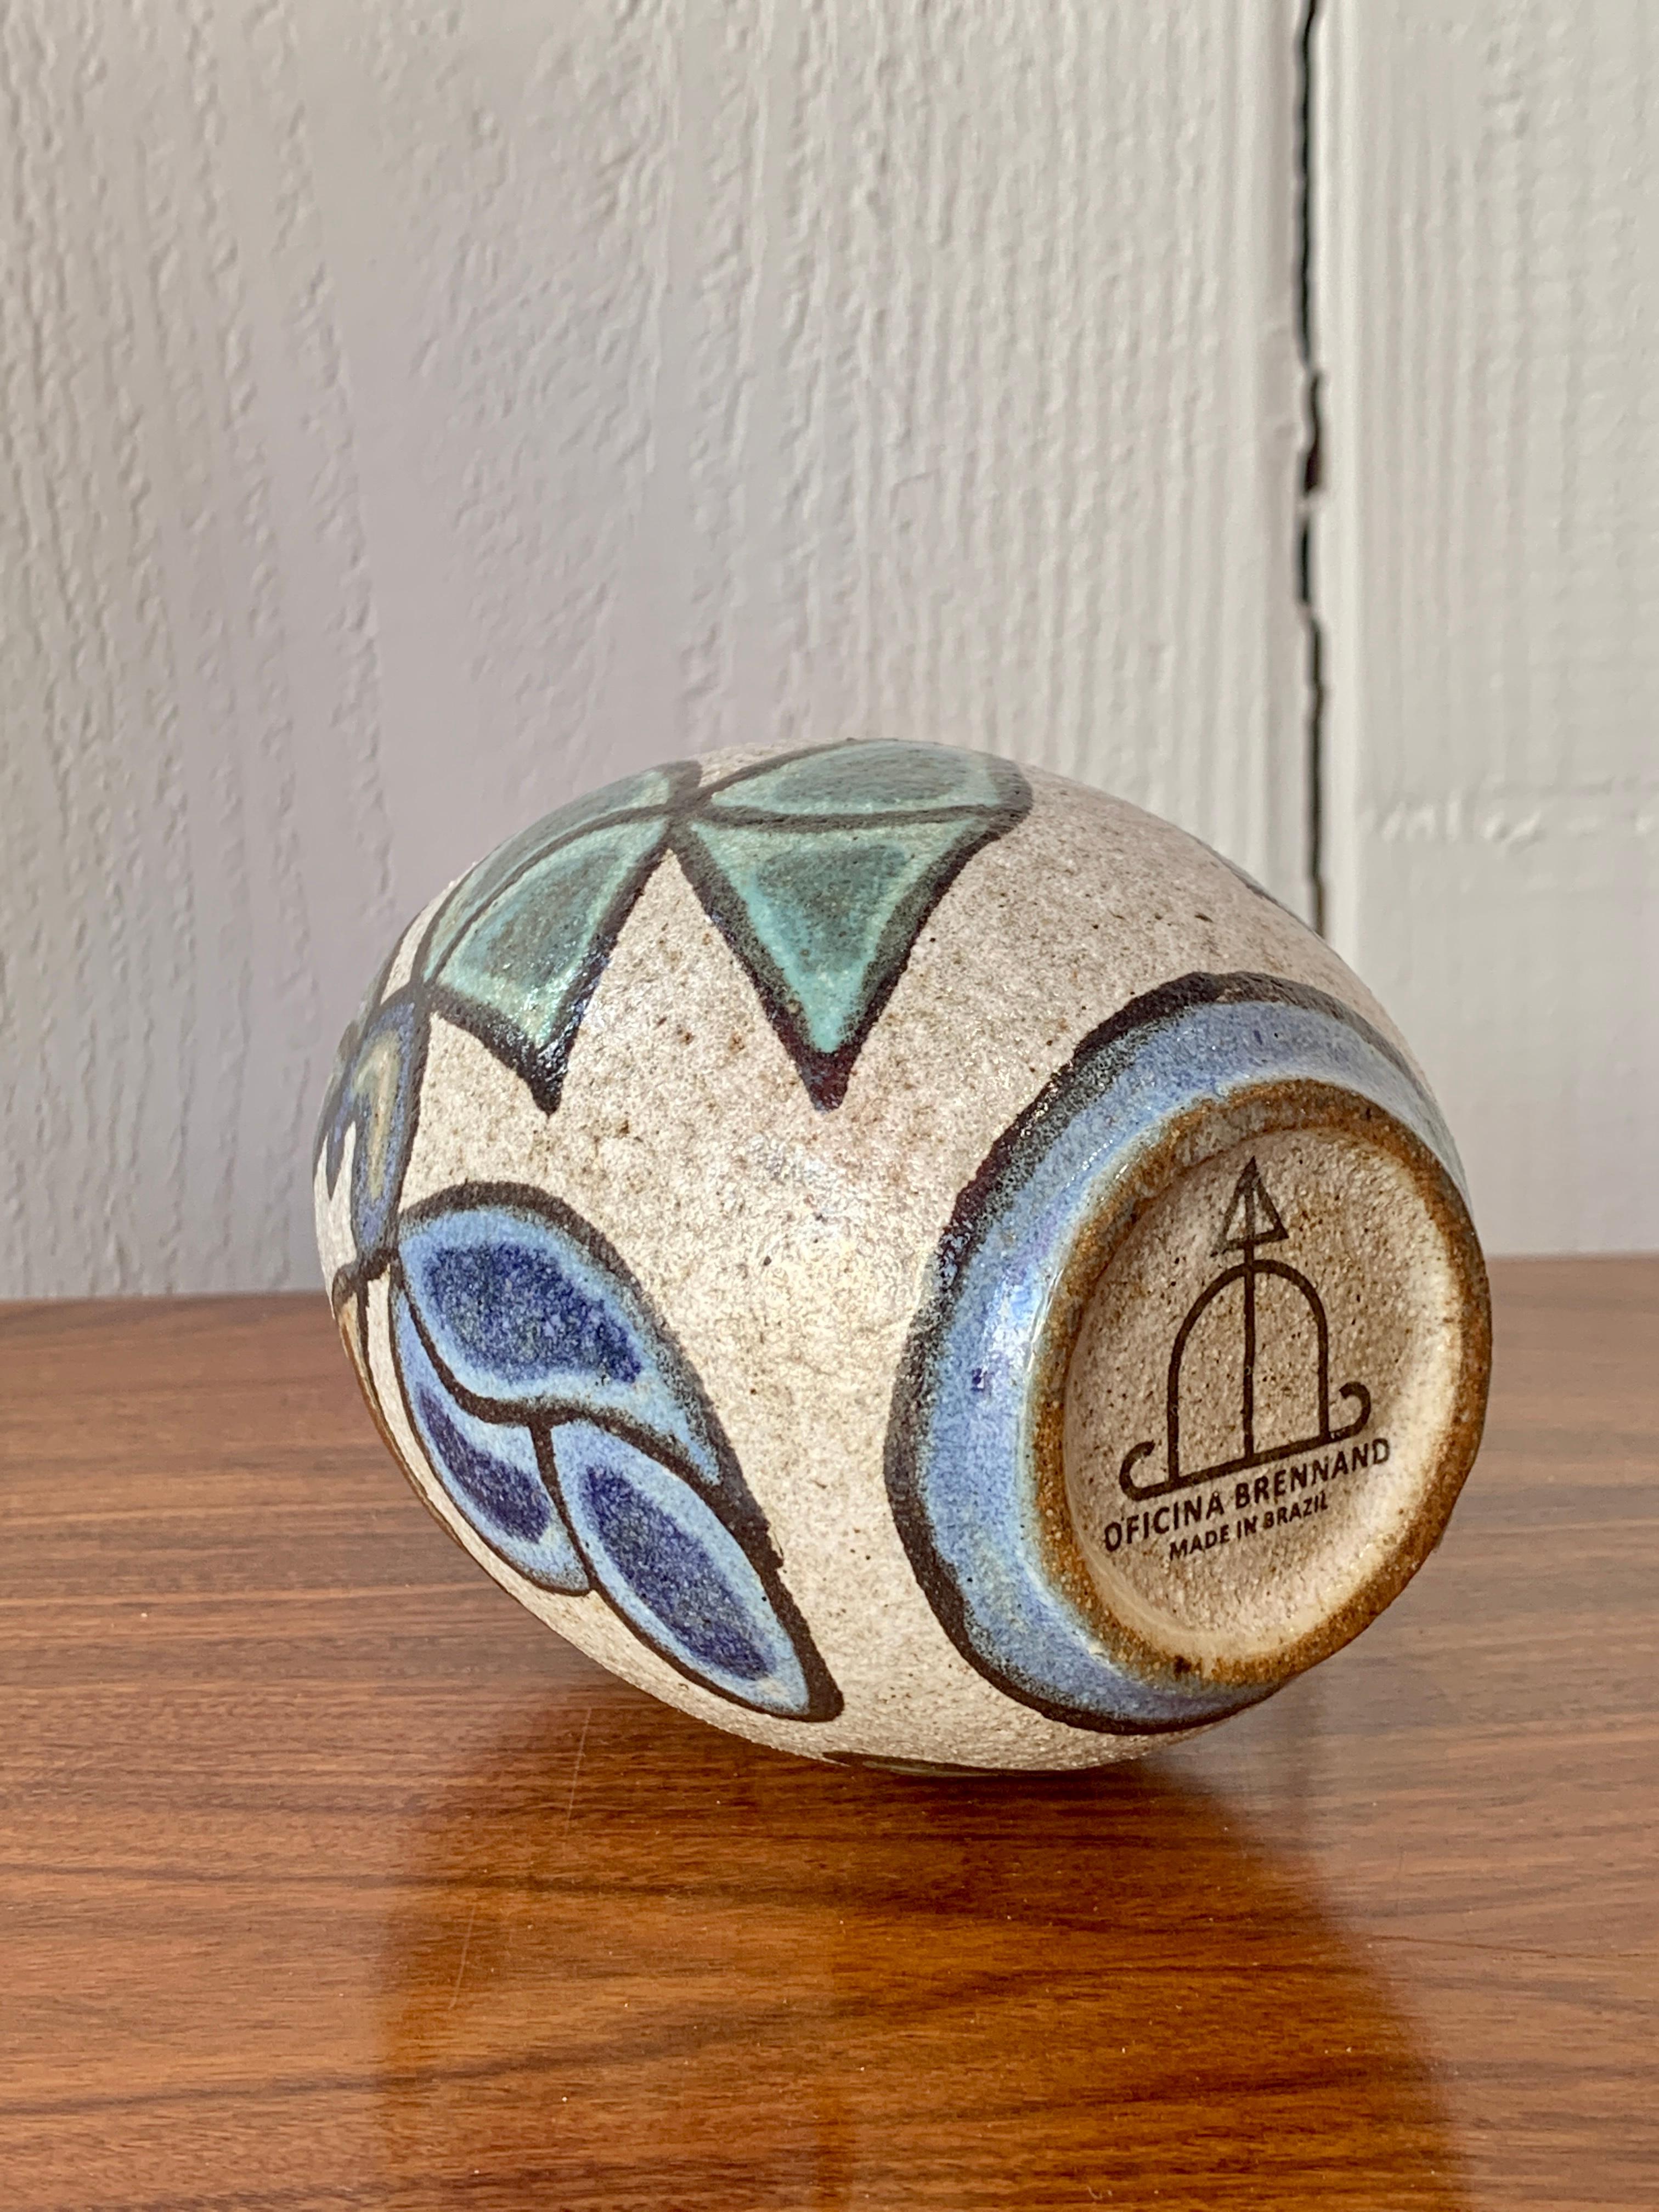 Hand-Crafted Francisco Brennand, Ceramic Egg, C. 1970 For Sale